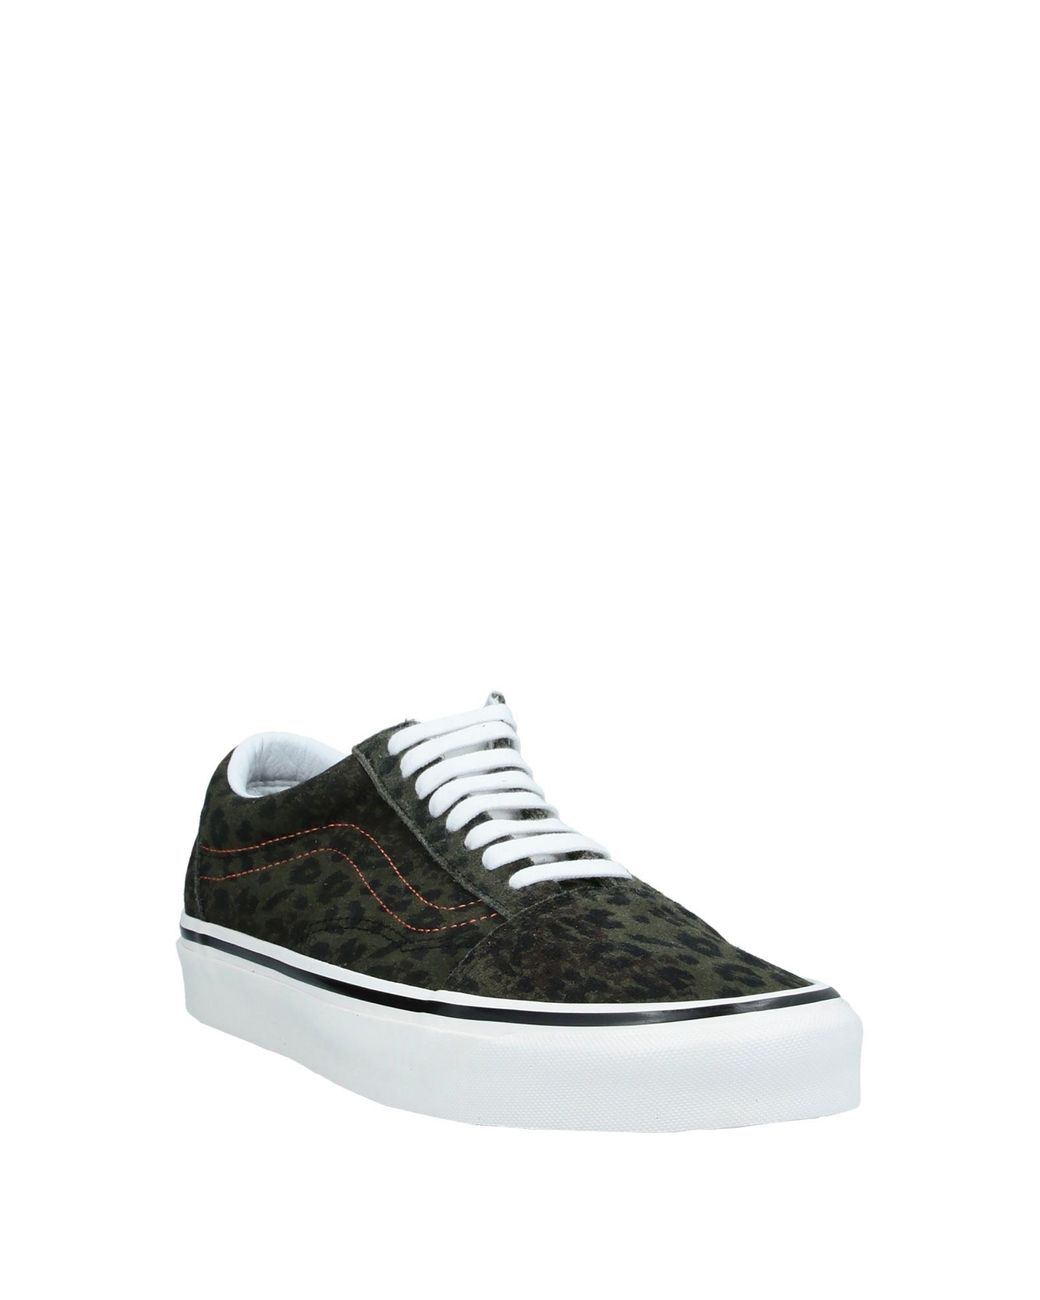 Vans Leather Trainers in Military Green (Green) for Men | Lyst